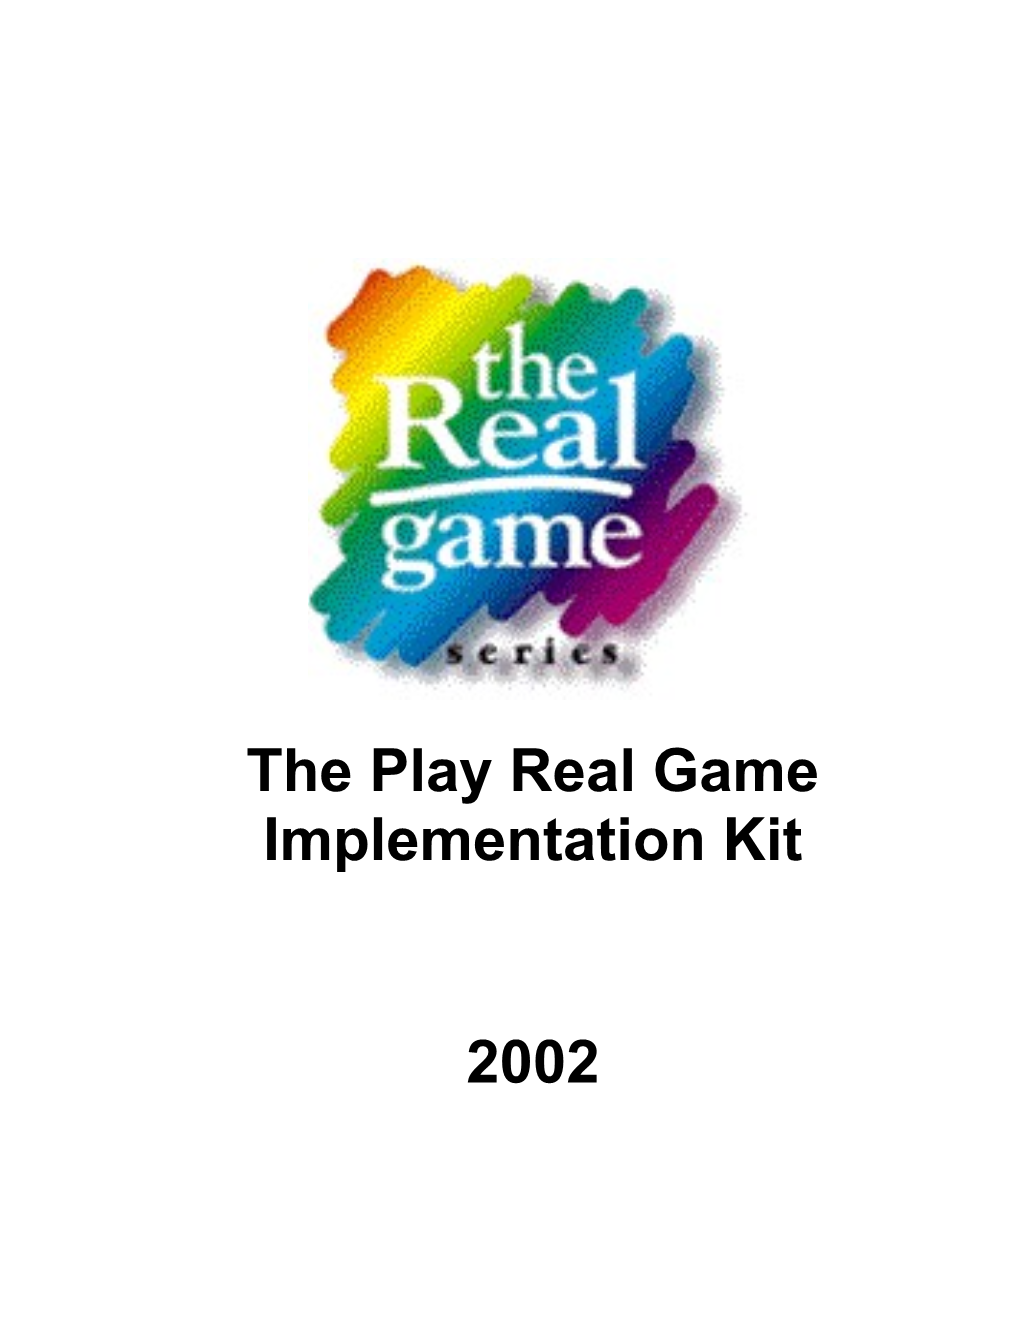 The Be Real Game Introduction